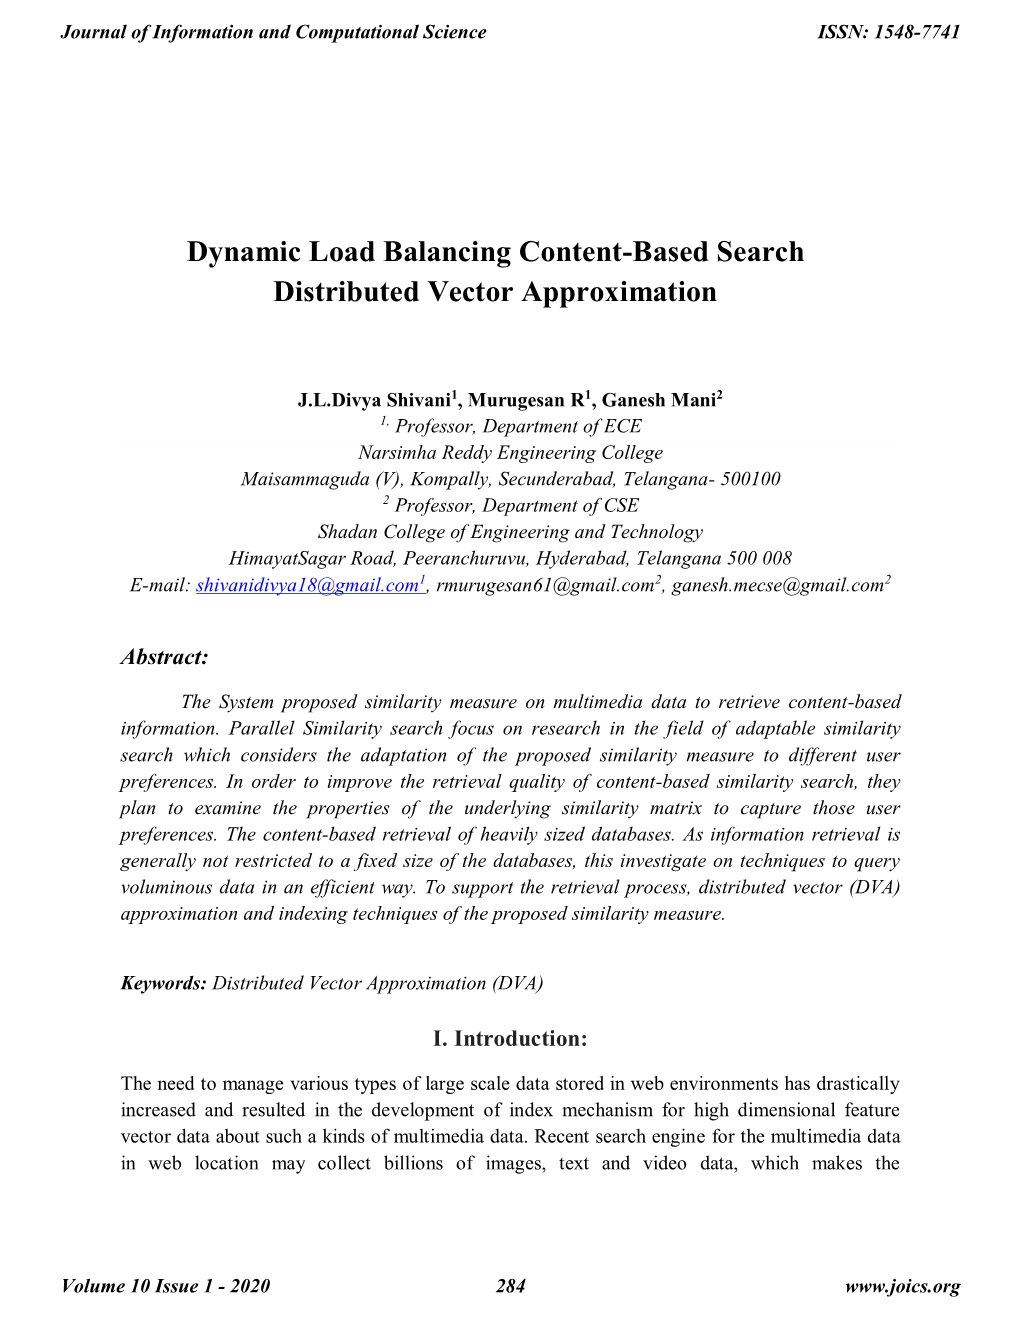 Dynamic Load Balancing Content-Based Search Distributed Vector Approximation